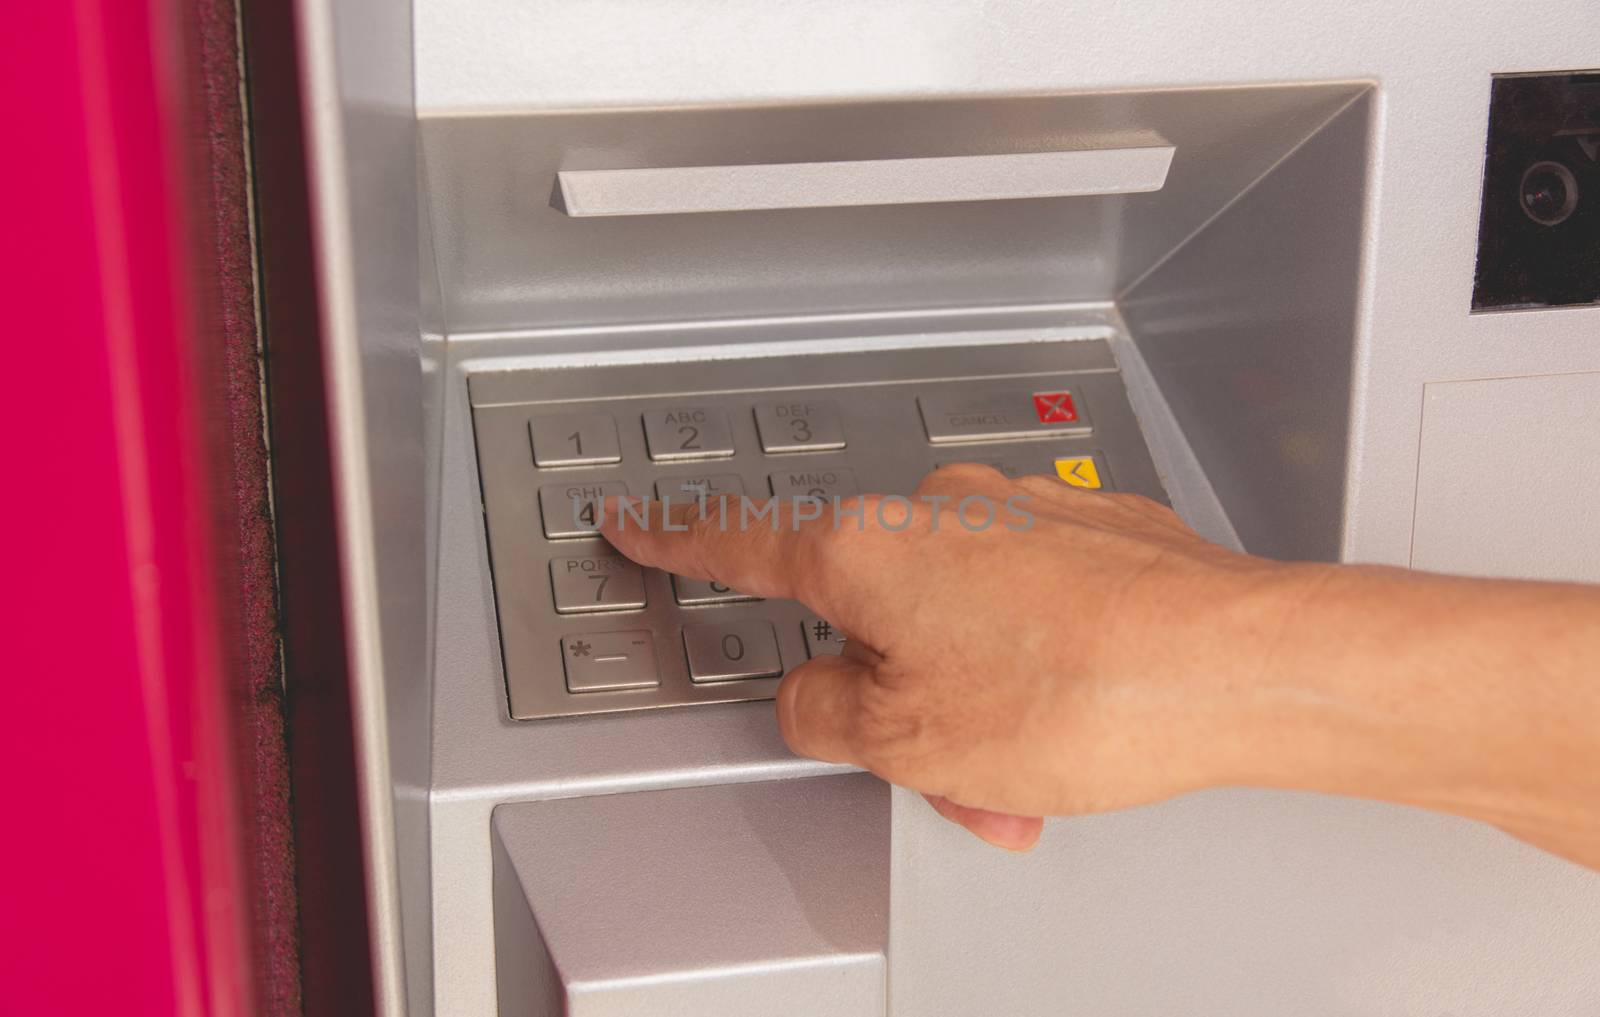 Hand of a woman push button in ATM, using an ATM. Woman using an by kirisa99